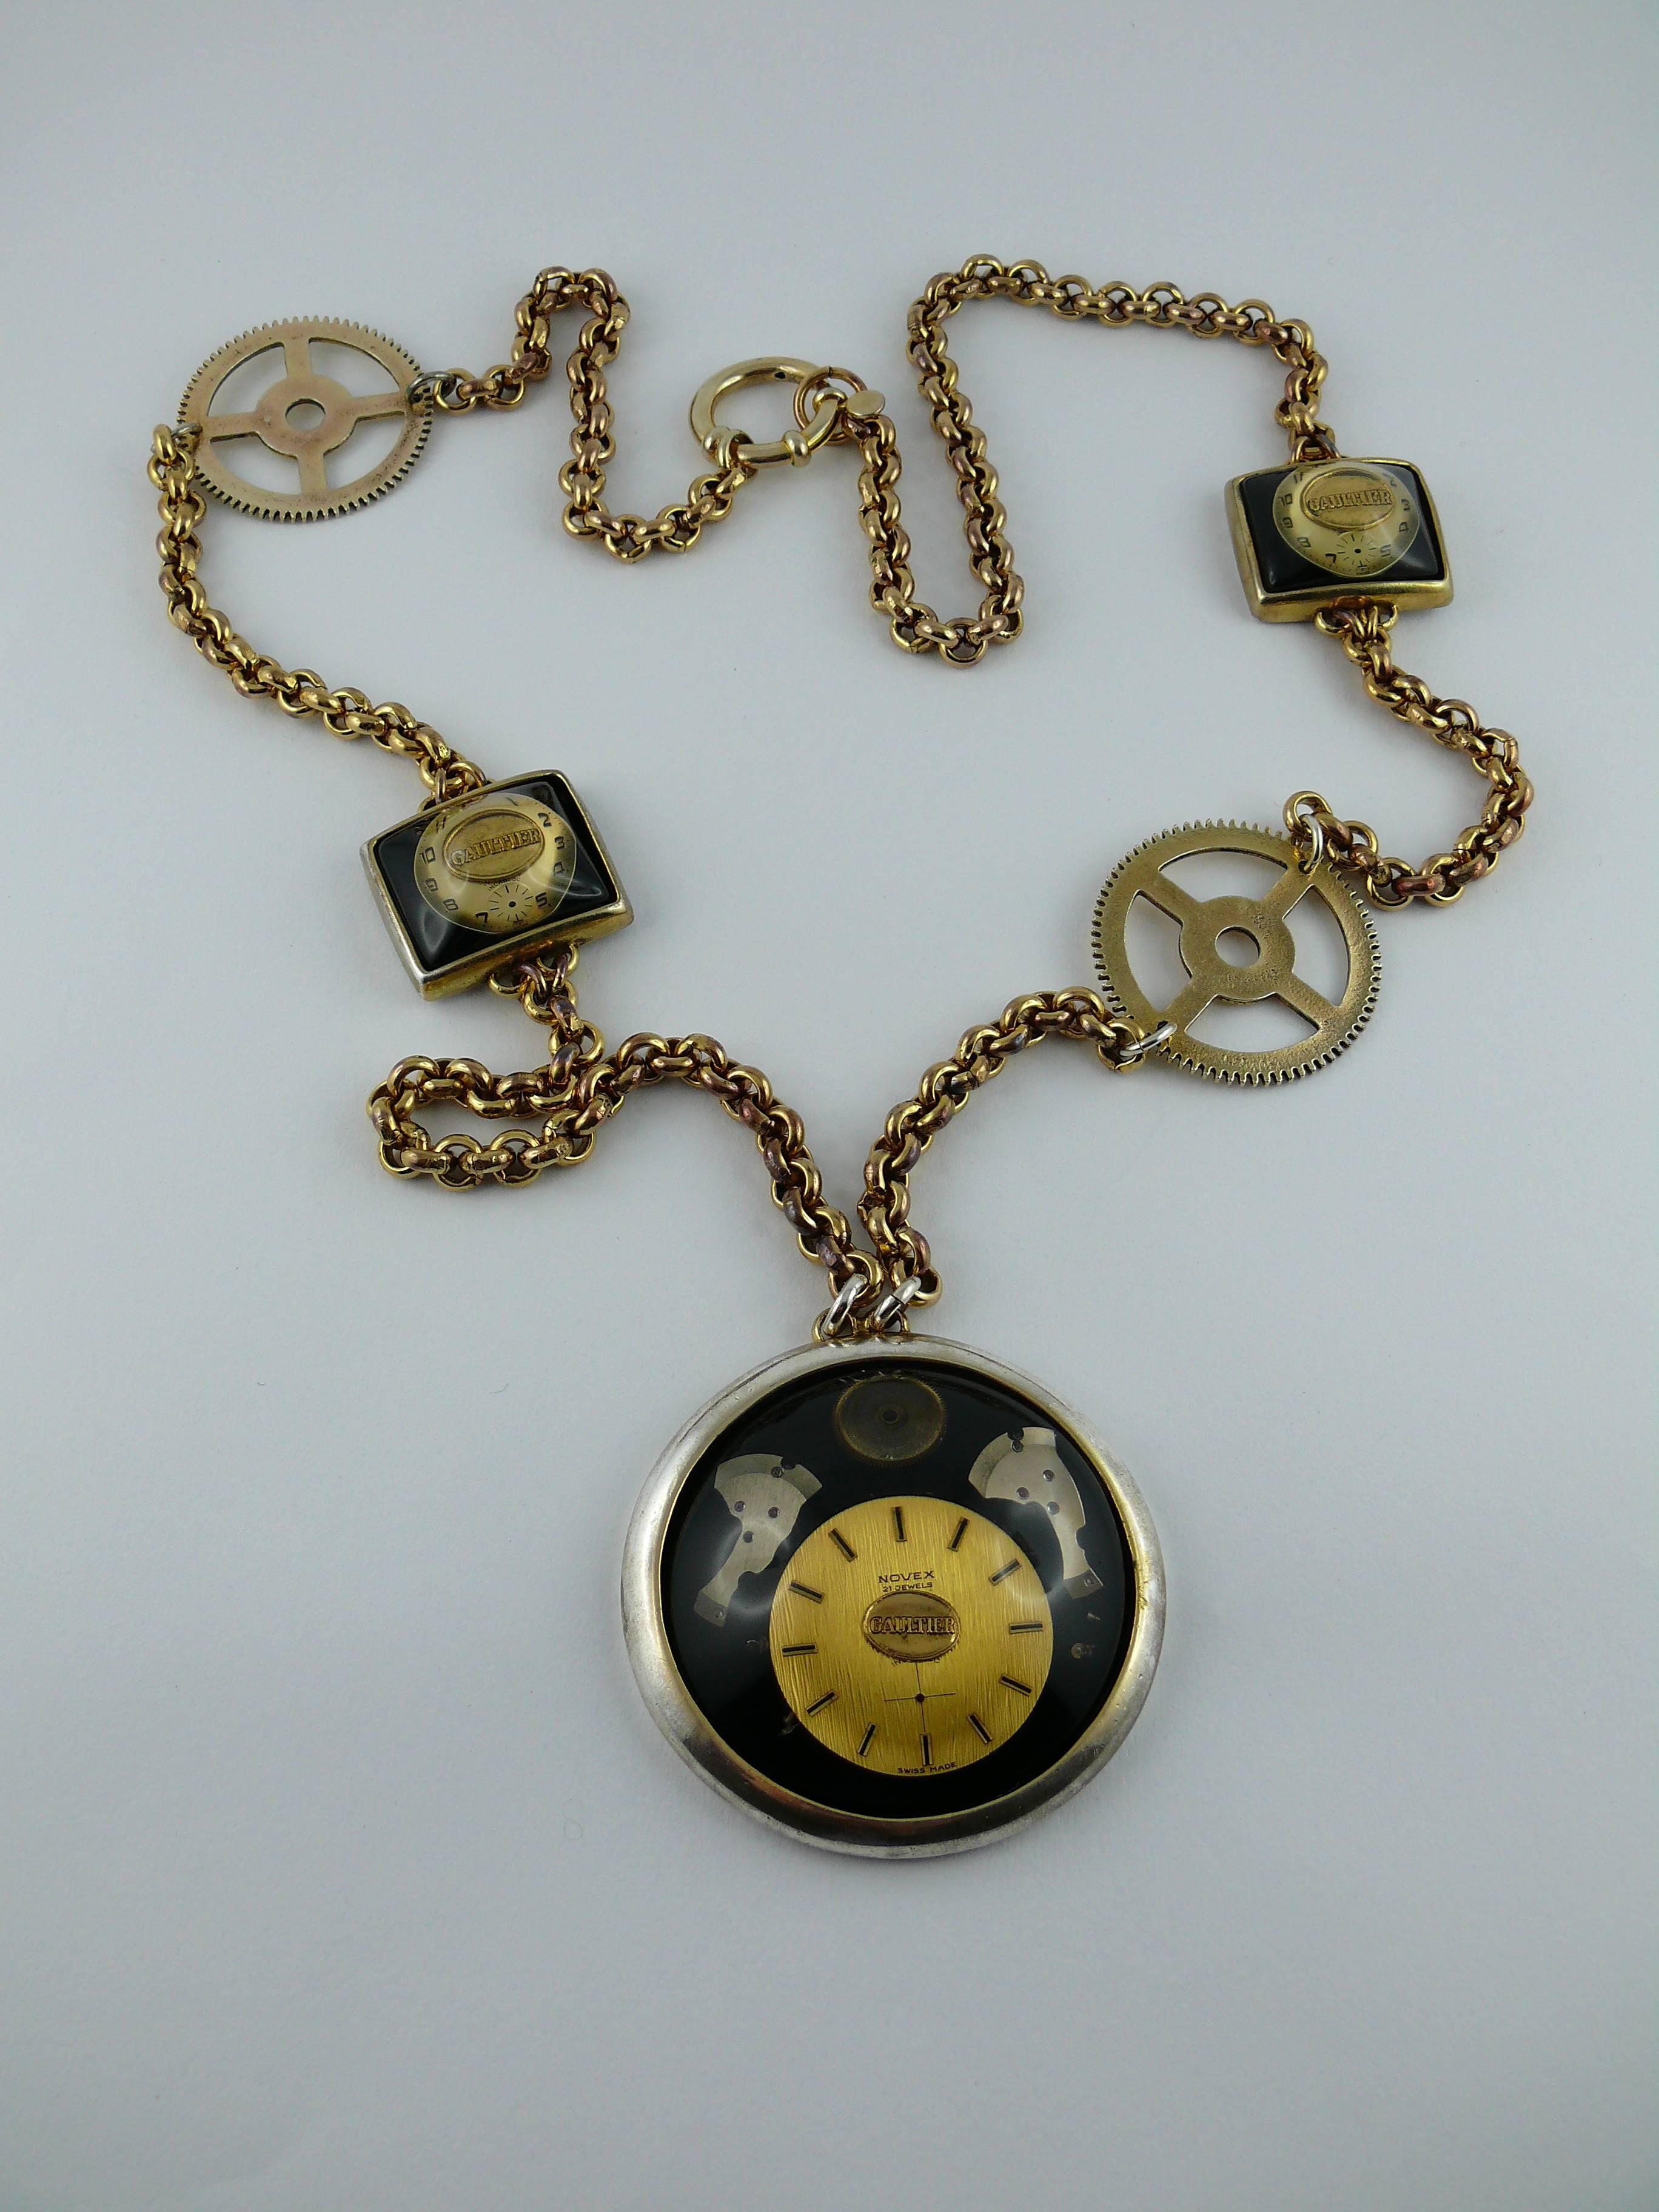 JEAN PAUL GAULTIER vintage steampunk watch necklace.

Chunky gold tone chain featuring gears, two small watch dials and a massive watch pendant.

Spring ring closure.

Marked GAULTIER.

Indicative measurements : length of the chain approx 91.5 cm